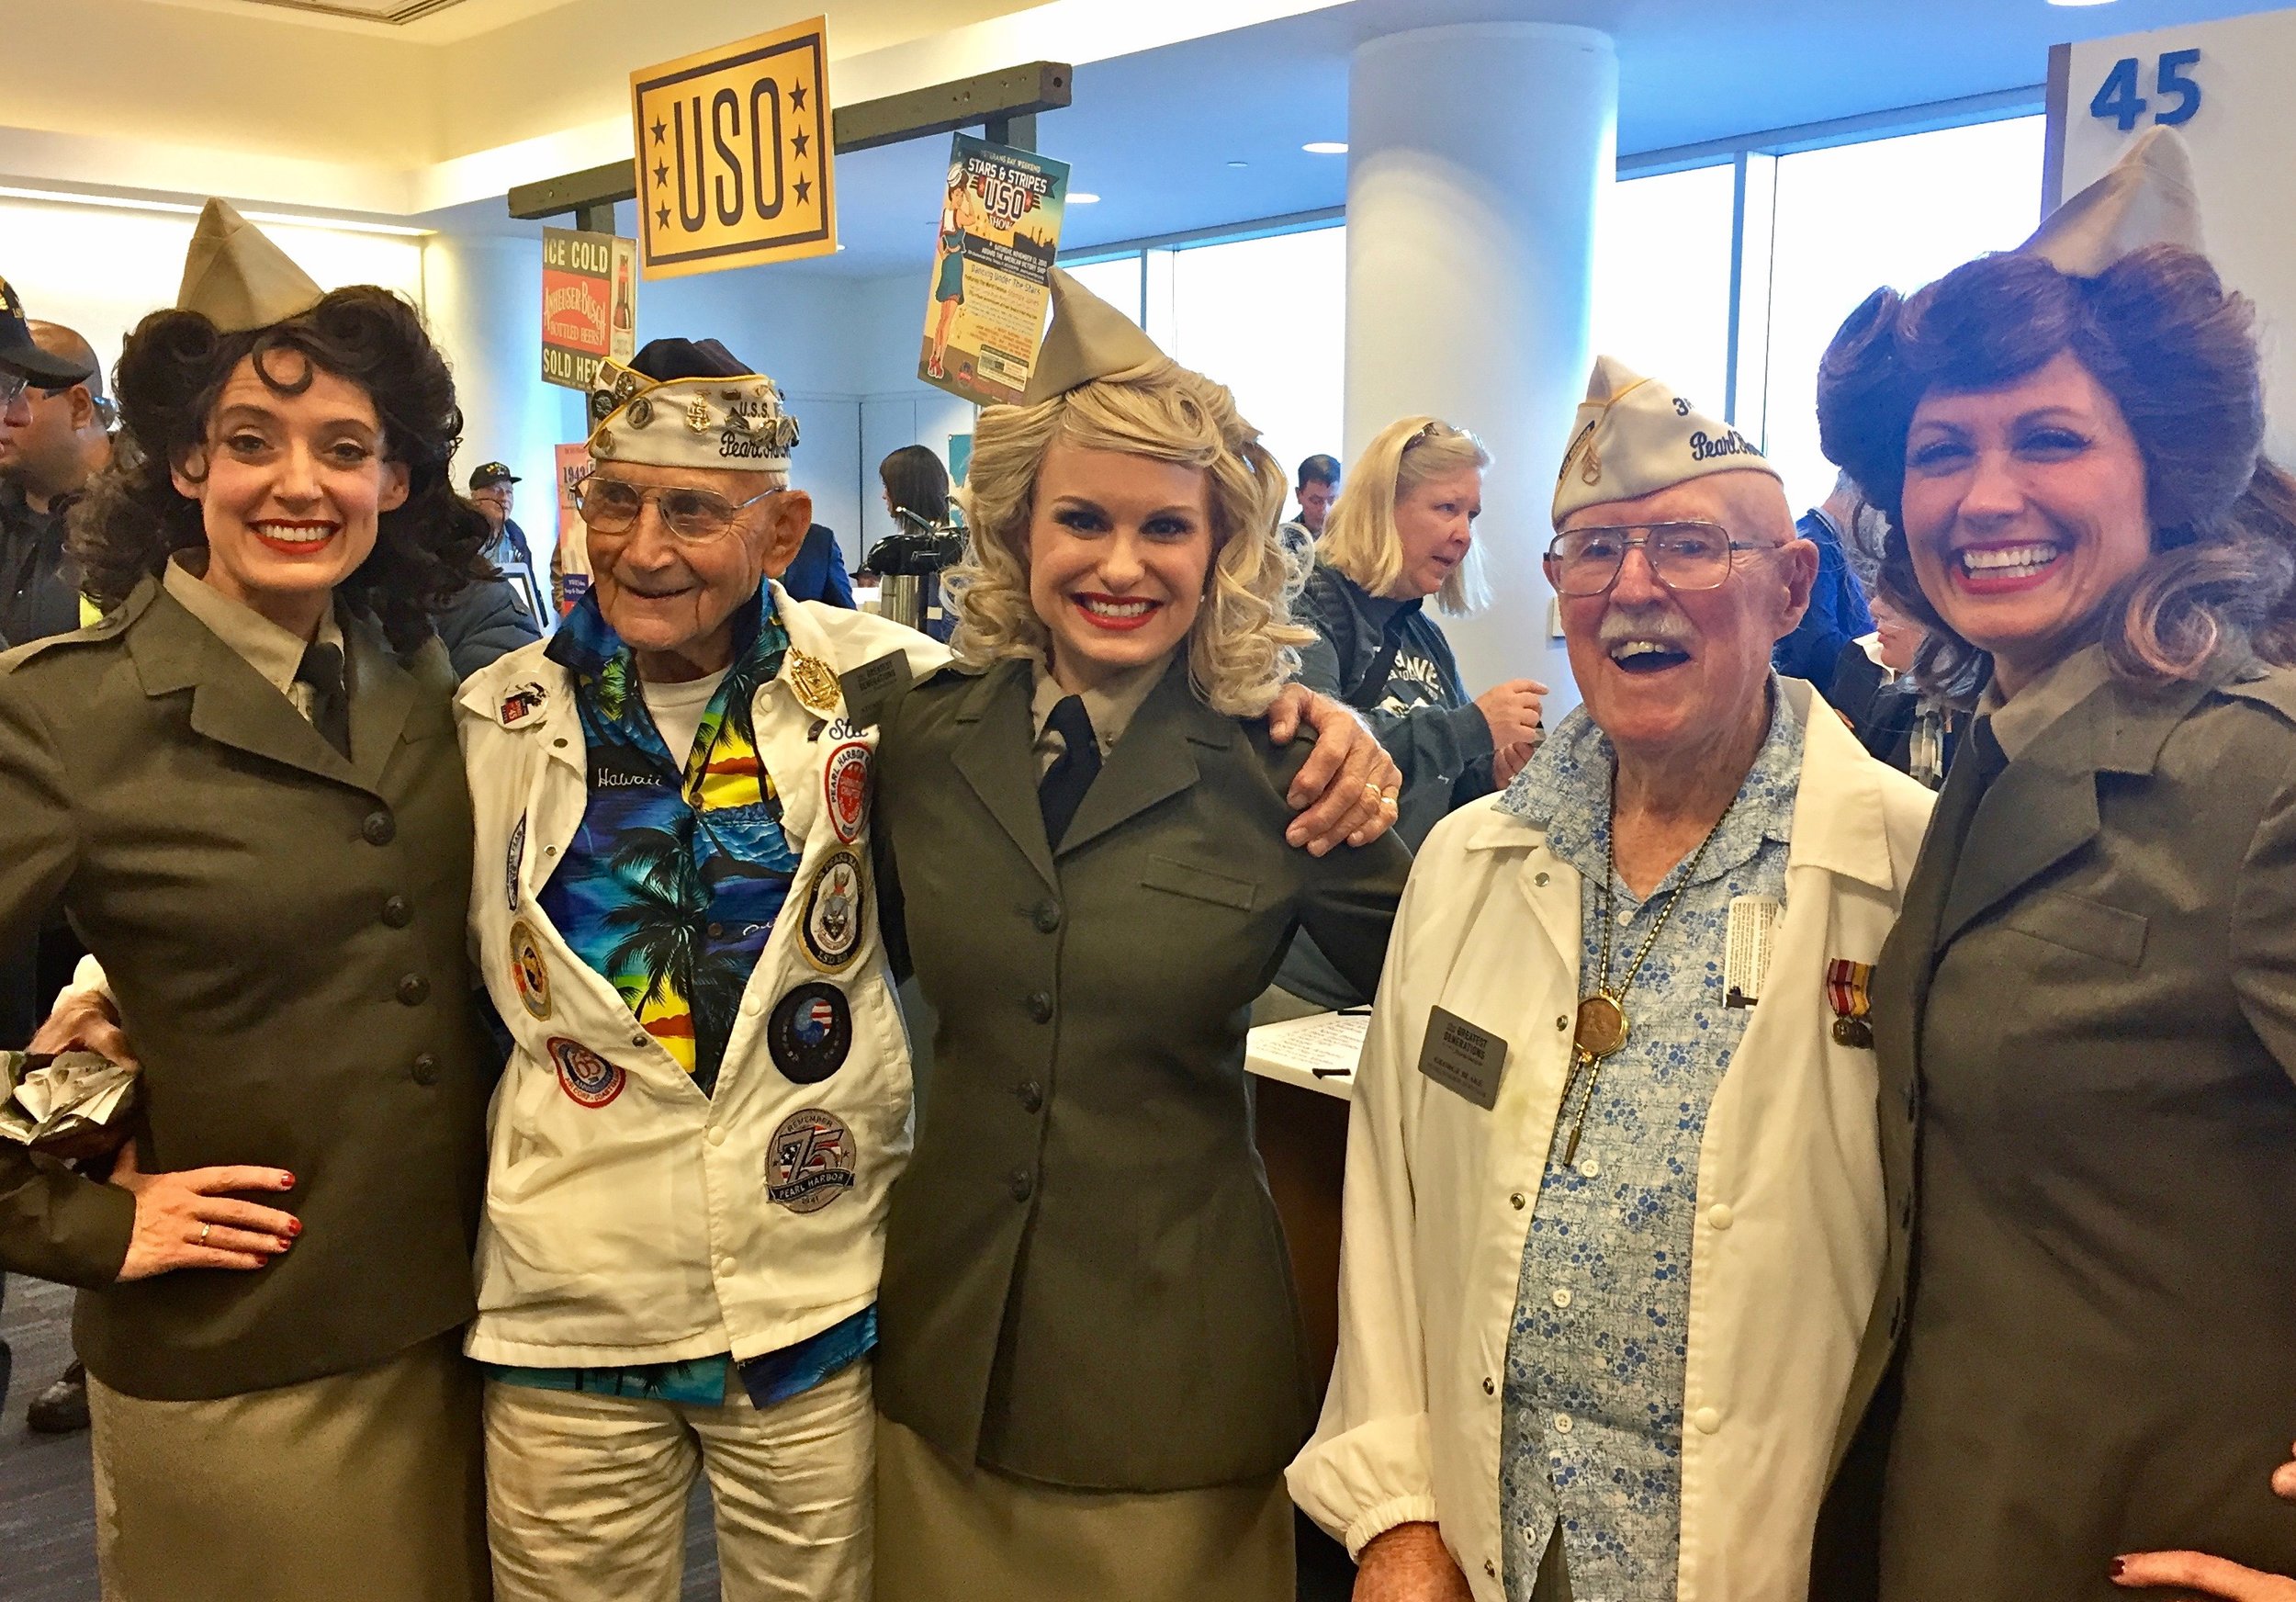 American Airlines Honor Flight sponsored by the Gary Sinise Foundation